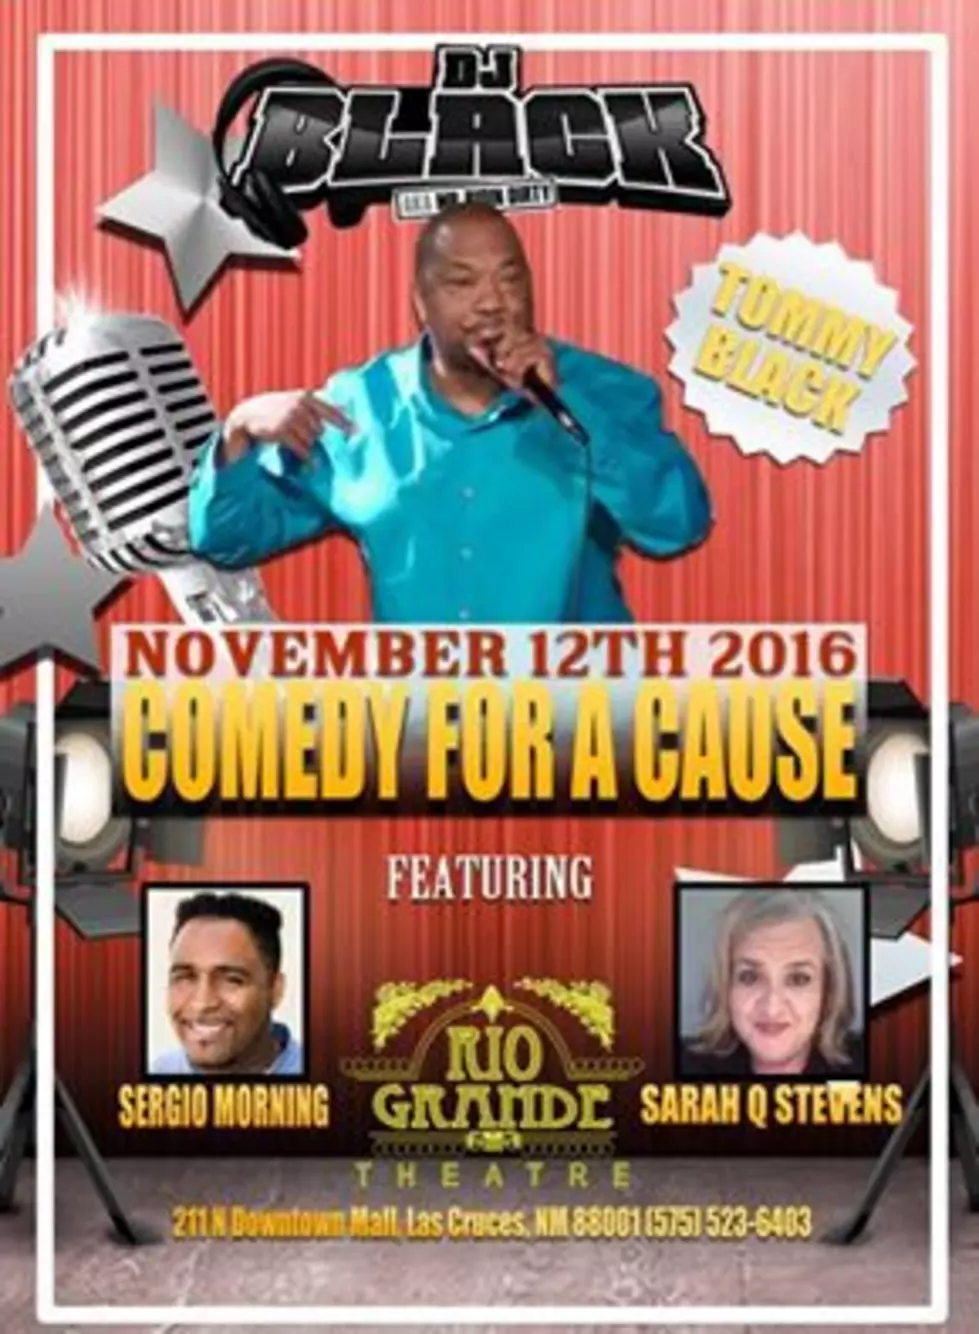 Comedy For A Cause to Benefit Homeless Families in Las Cruces